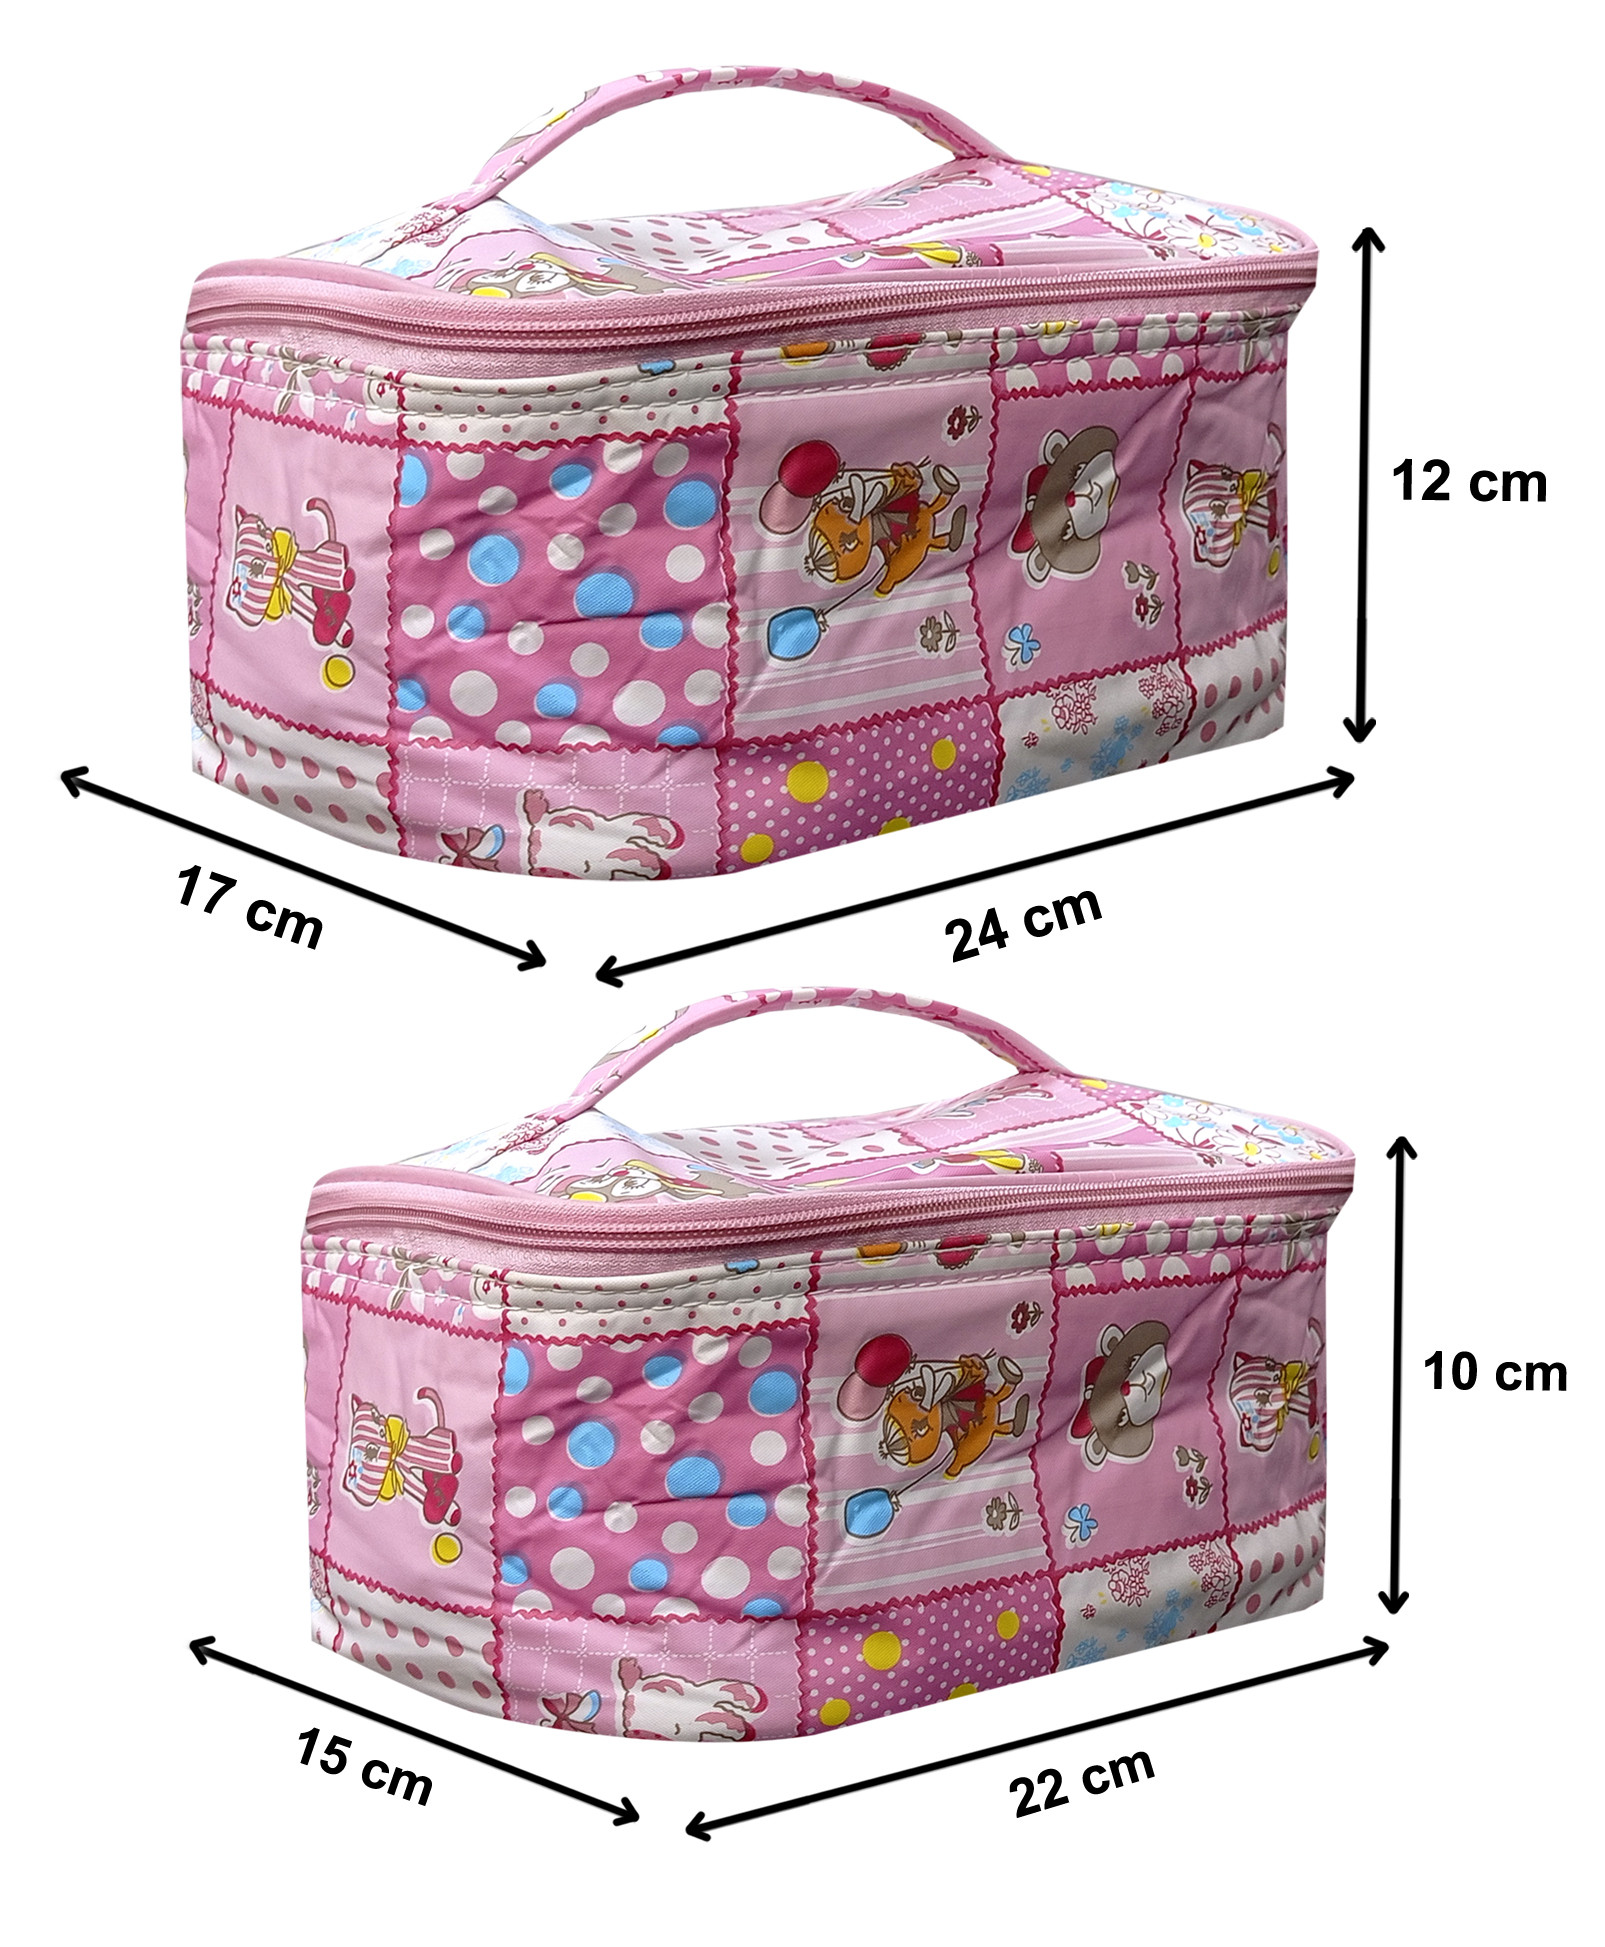 Kuber Industries Cartoon Printed Cosmetic Bag Travel Toiletry Bag for Women And Men Toiletry Organizer Makeup Pouch for Vacation Travel, Bathroom-Set of 2 (Pink)